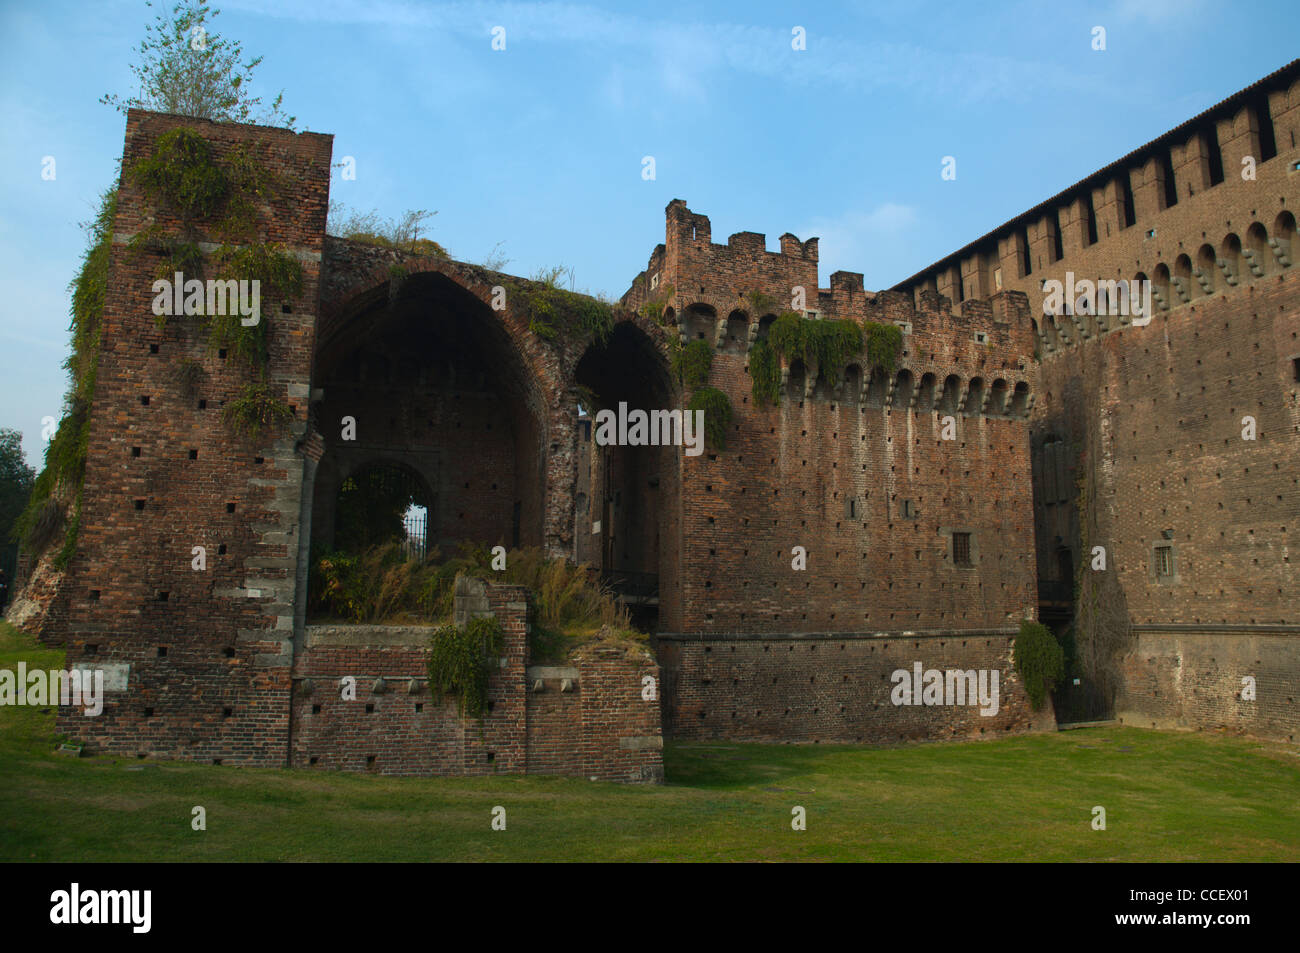 Moats dried by Napoleon in early 18th century encircling the walls of Castello Sforzesco castle Milan Lombardy region Italy Stock Photo